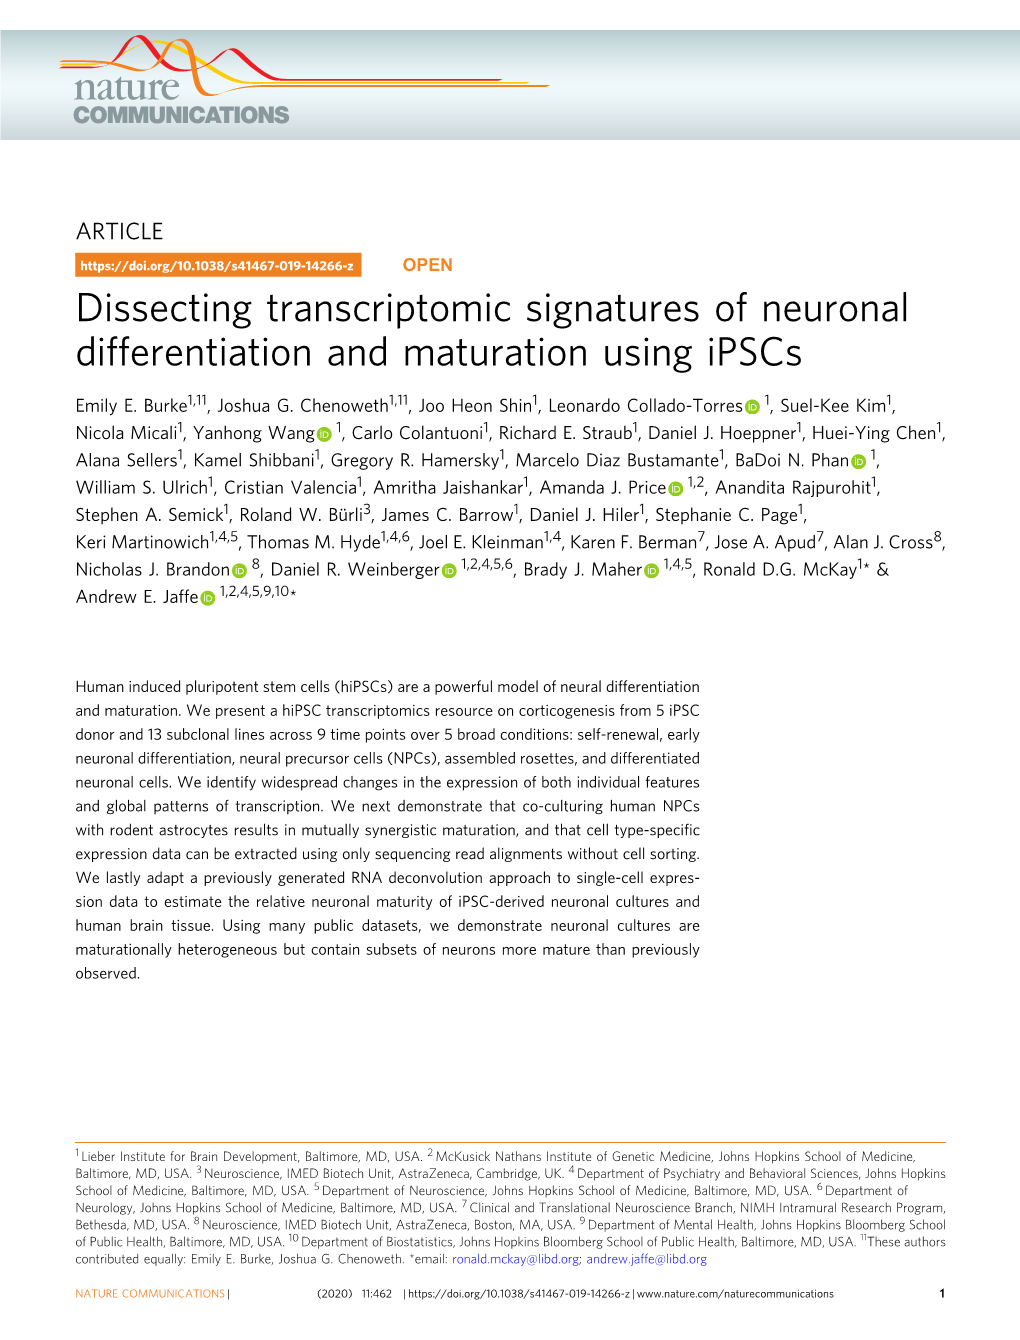 Dissecting Transcriptomic Signatures of Neuronal Differentiation and Maturation Using Ipscs